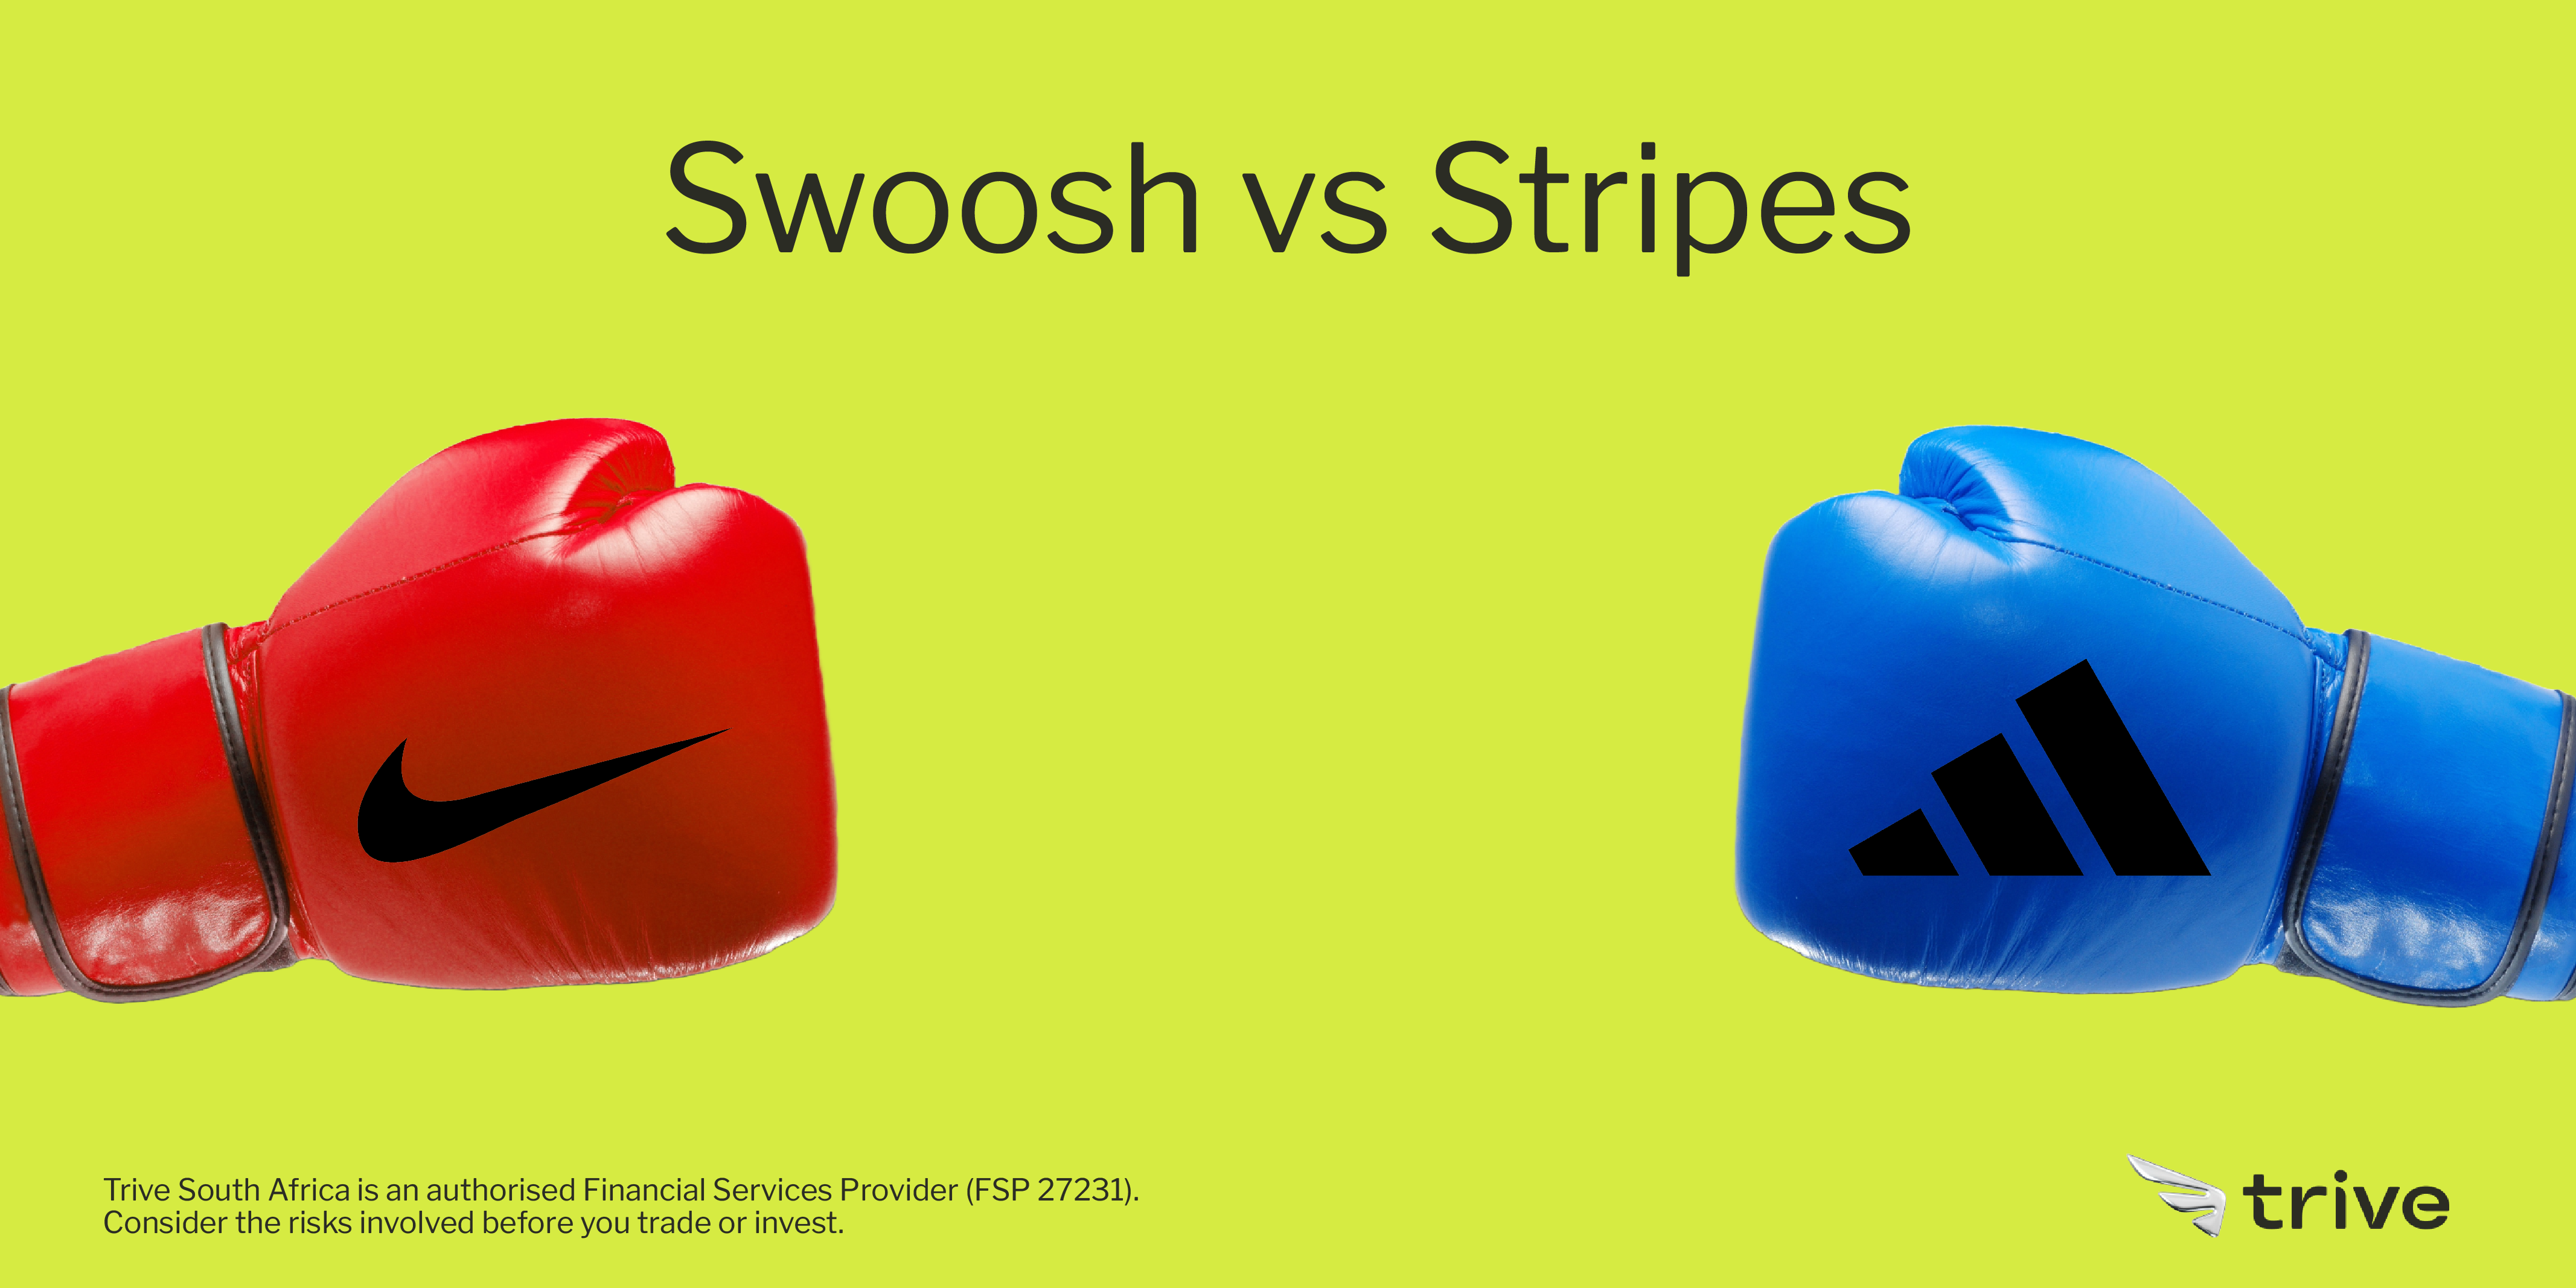 Read more about the article Nike vs Adidas: From Swoosh to Stripes